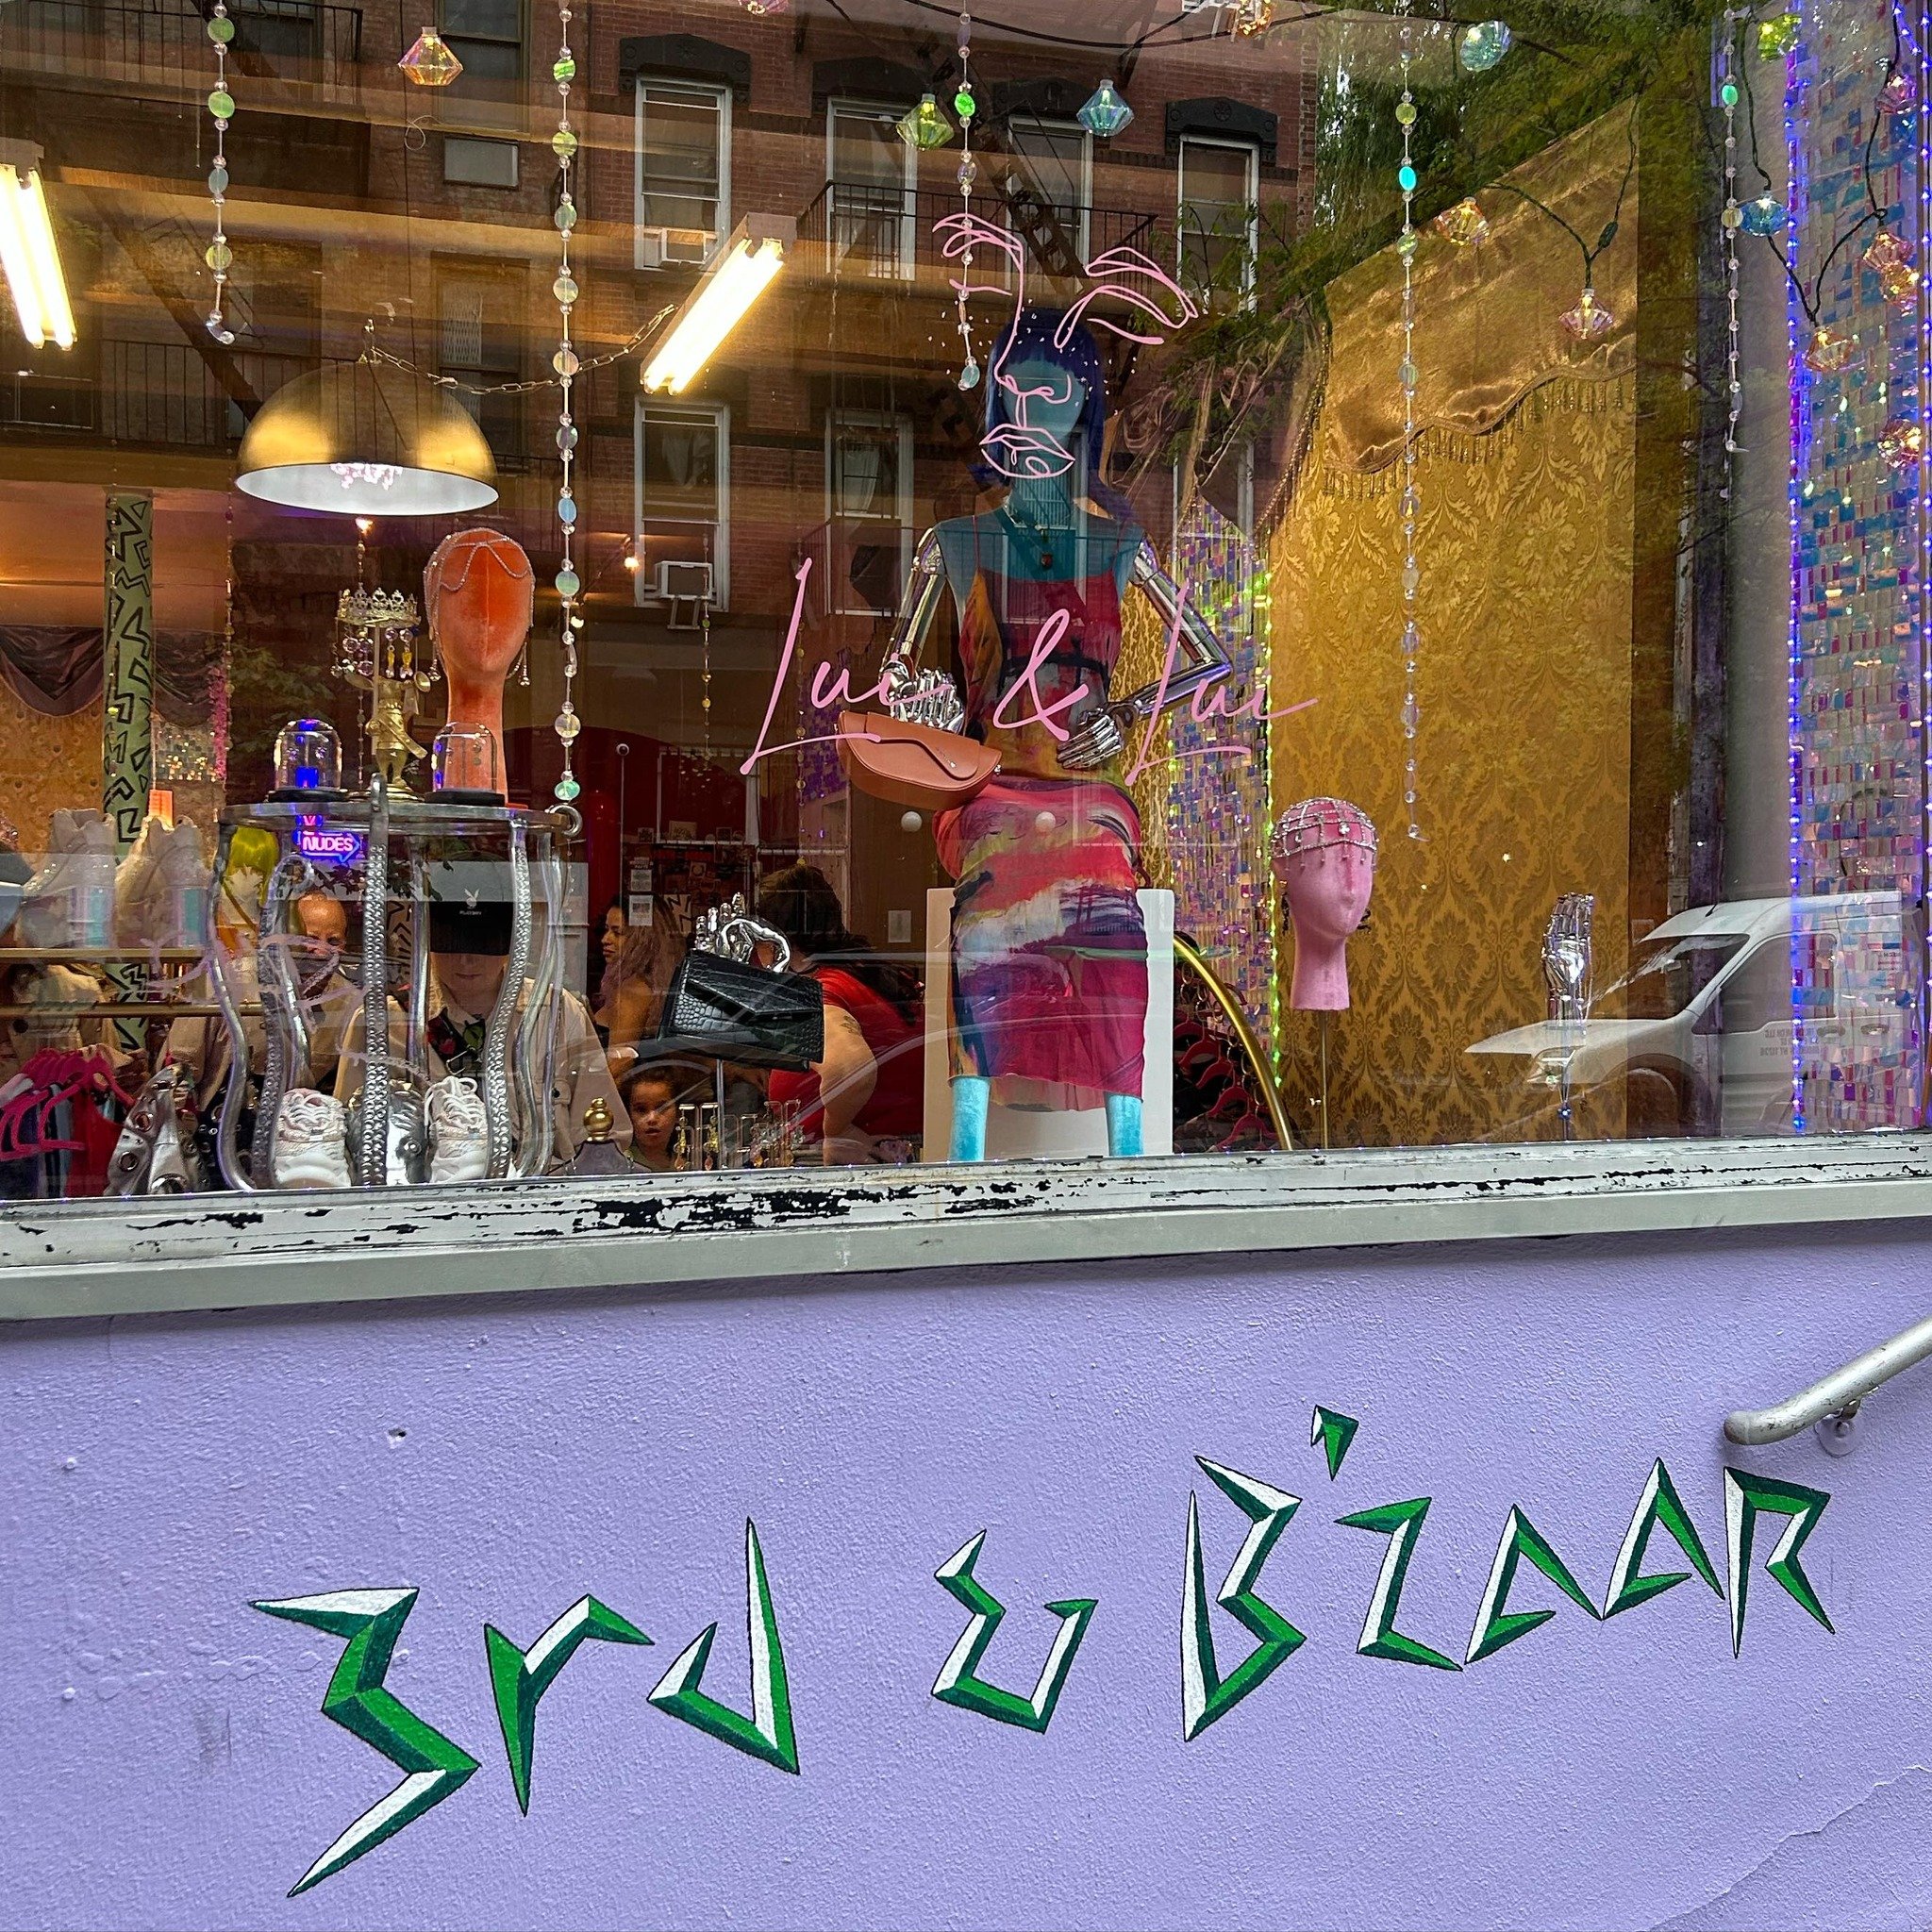 Swing over to @3rdandbzaar today to check out the new / current incarnation of the shop curated by @luiandluinyc featuring fresh fashion, vintage &amp; more!! 

The sun is shining in the East Village &amp; it&rsquo;s a great day to take a stroll &amp